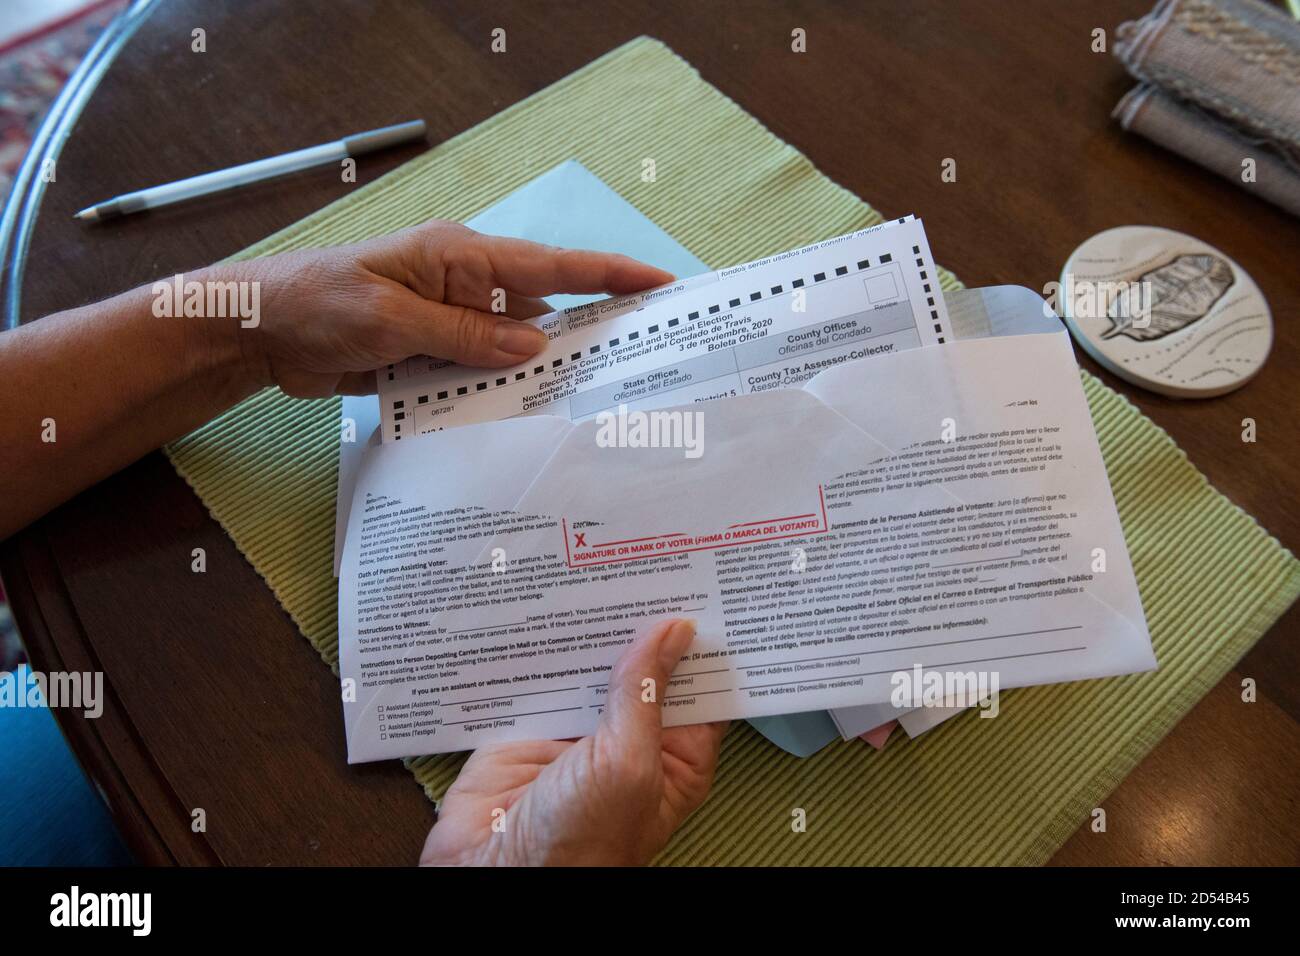 Austin, Texas, October 12, 2020: Woman encloses her completed mail-in absentee ballot into the provided official envelope. The form must to be either mailed back or dropped off in person in time to be counted before the November 3rd election day. Stock Photo